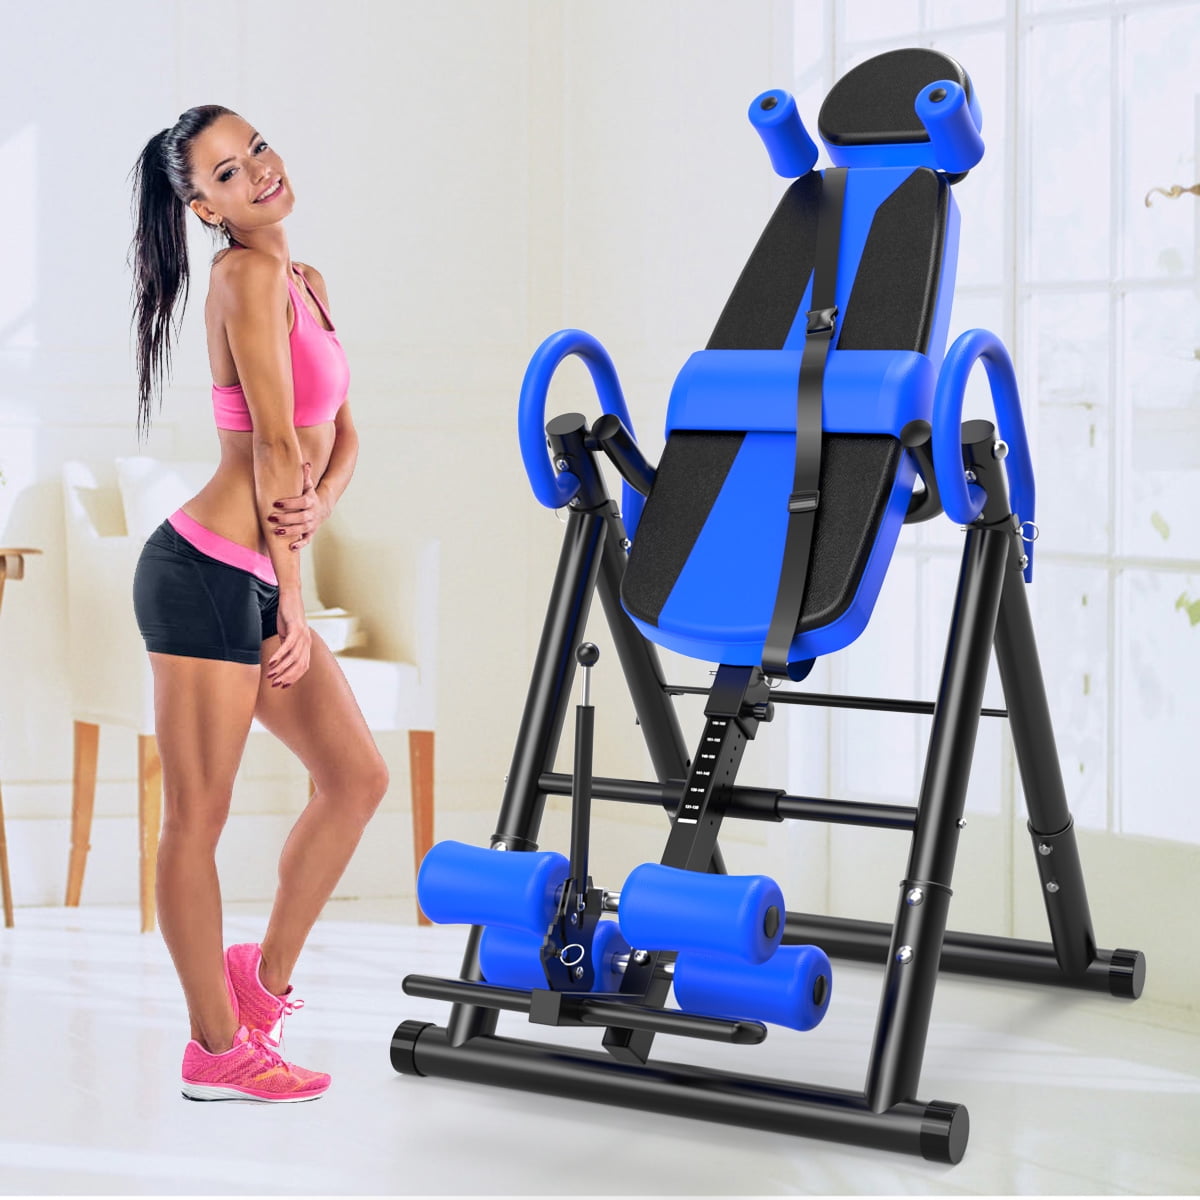 Inversion Table Heavy Duty Adjustable Stretcher Machine For Back Pain Relief US 